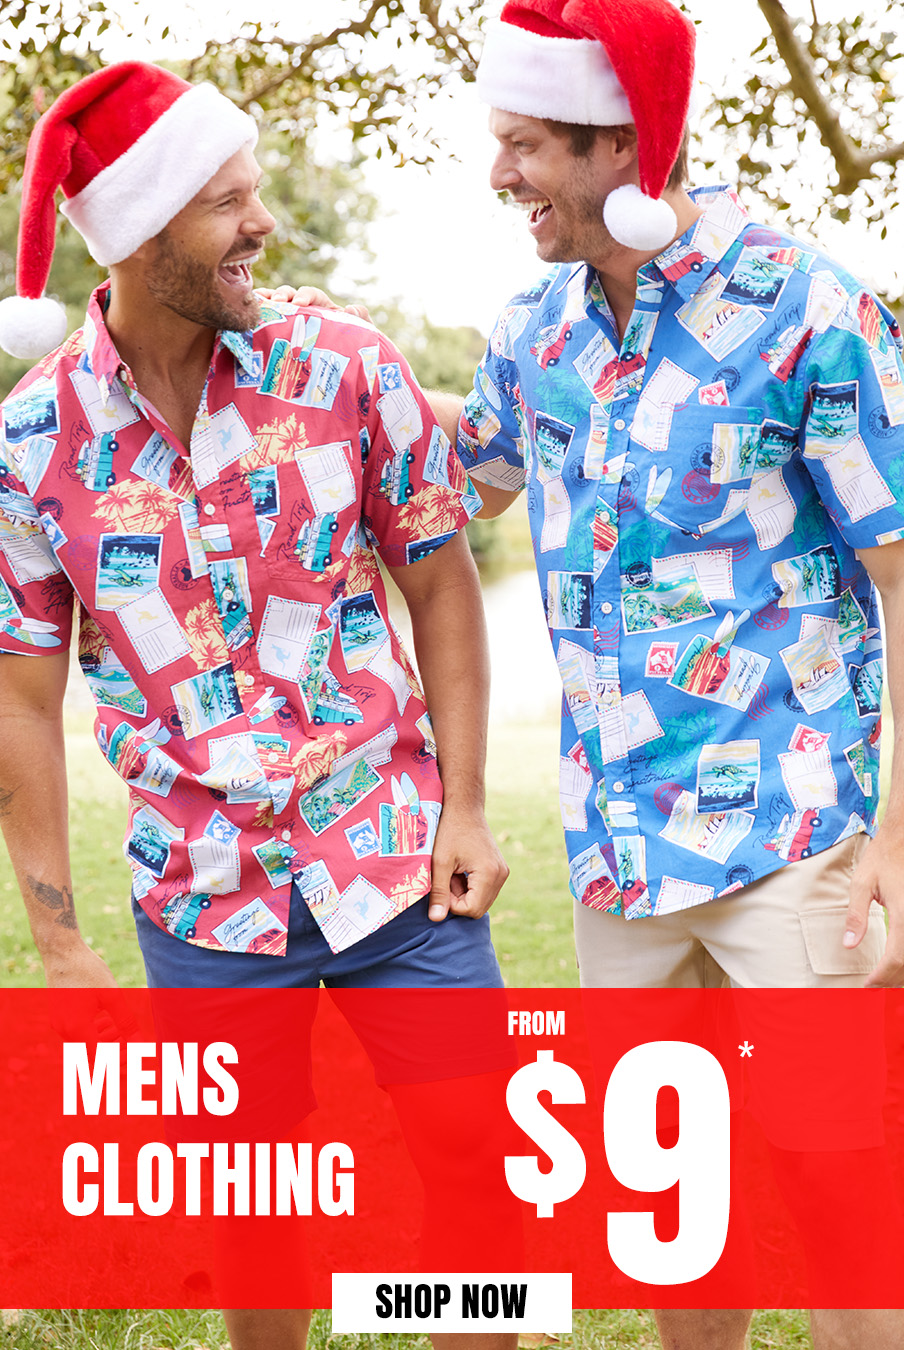 Rivers Mens Clothing From $9*